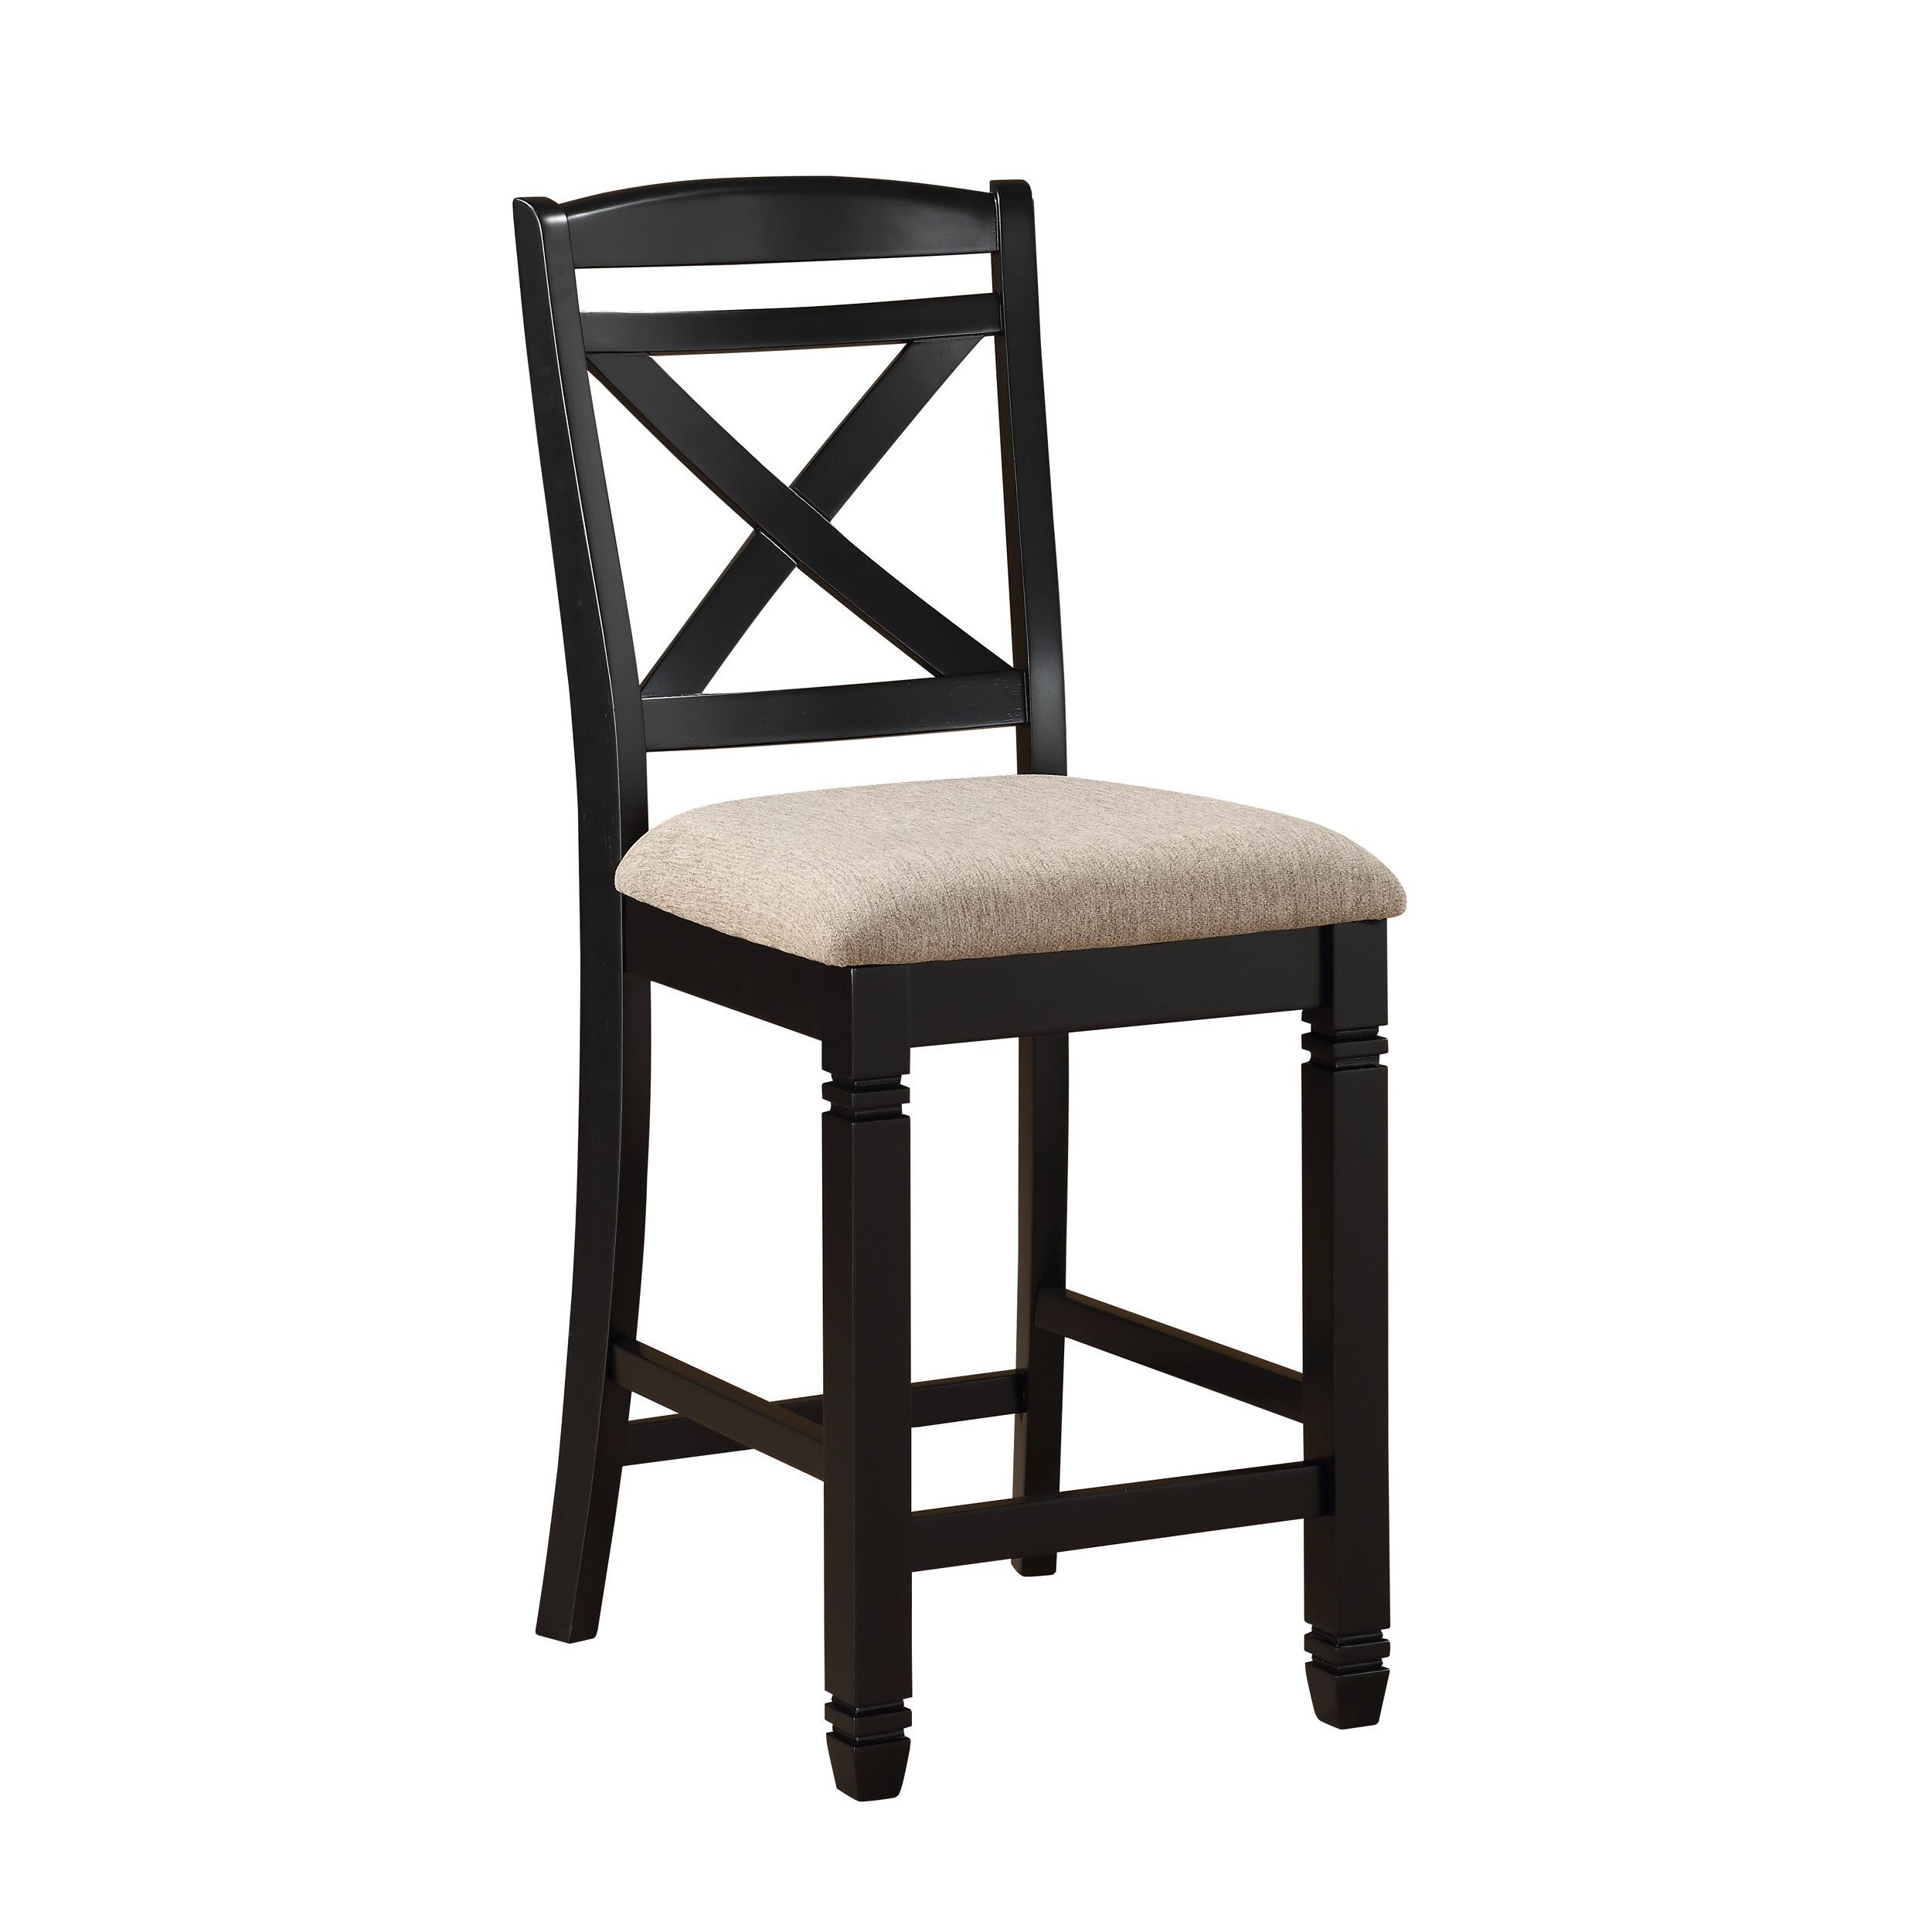 Transitional Counter Height Chair 5705BK-24 Baywater 5705BK-24 in Black Polyester